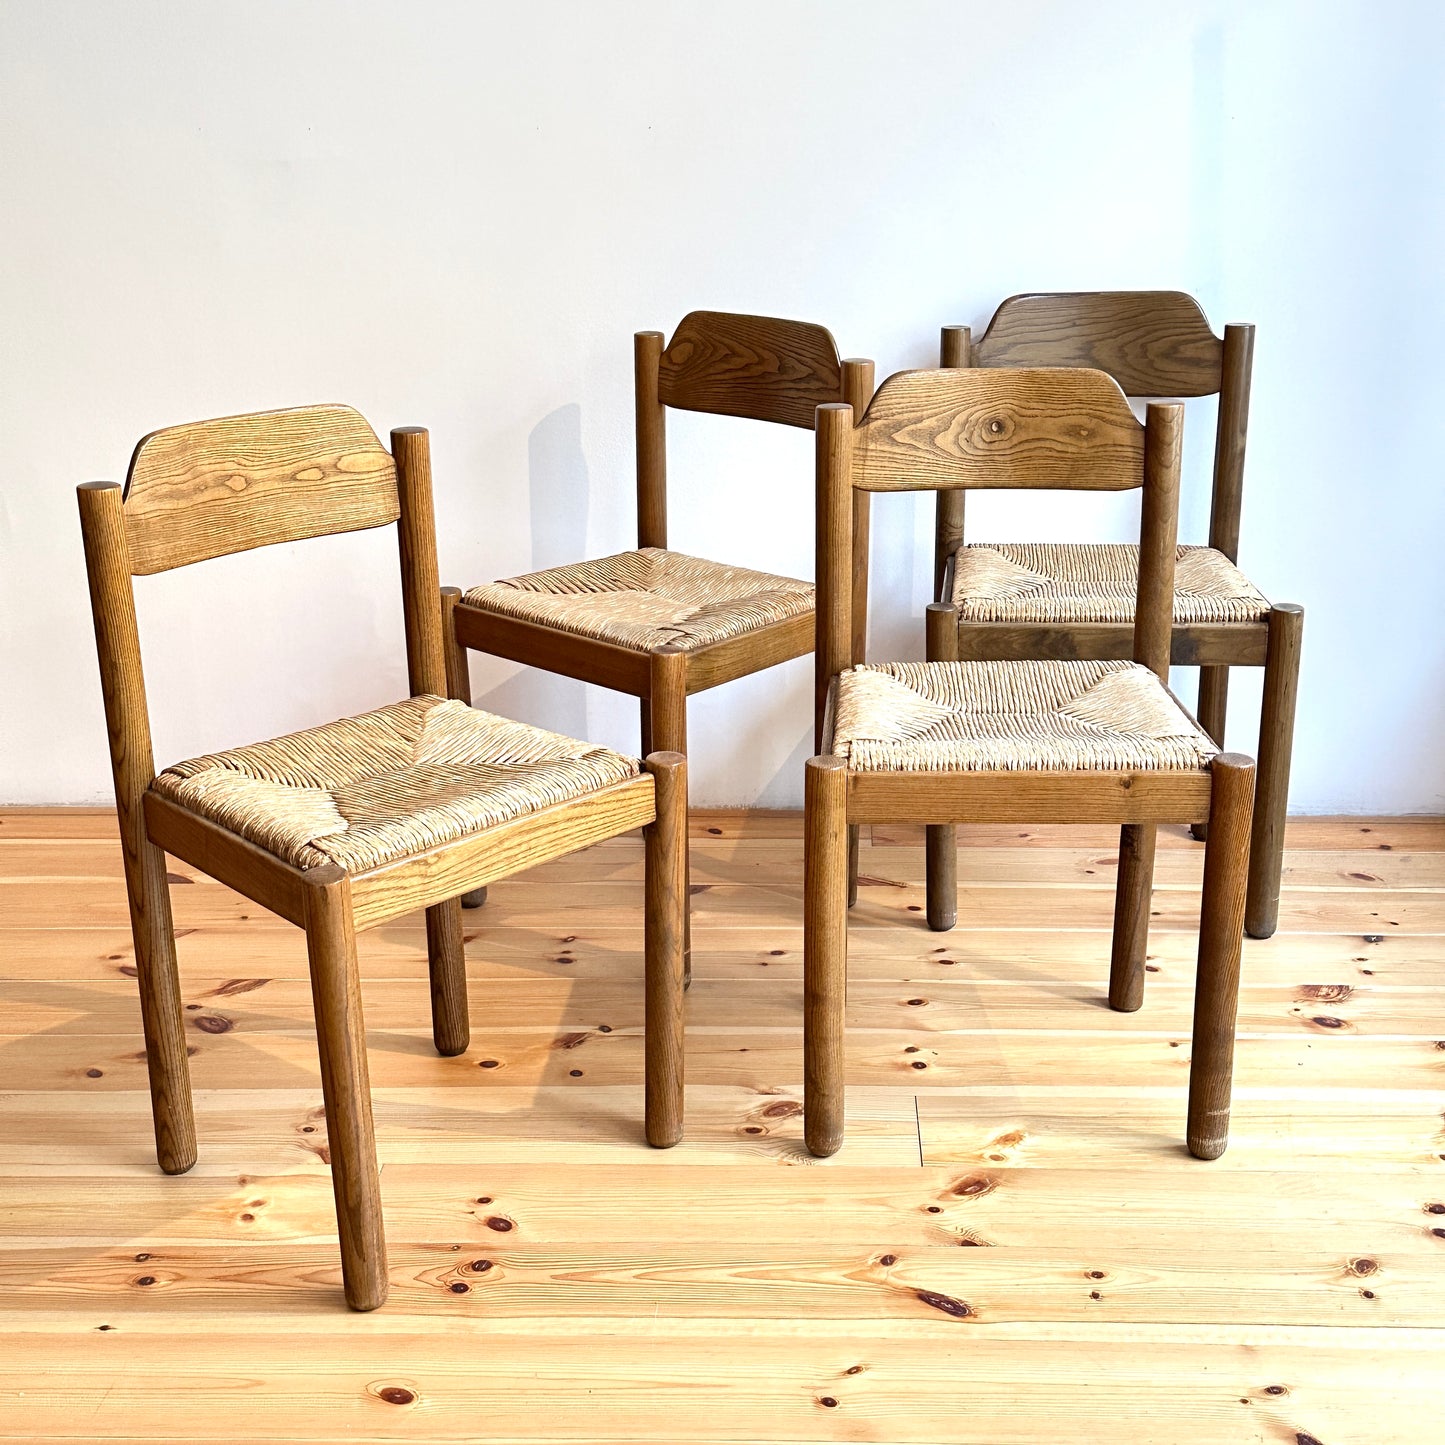 Set of 4 wood and wicker dining chairs, vintage